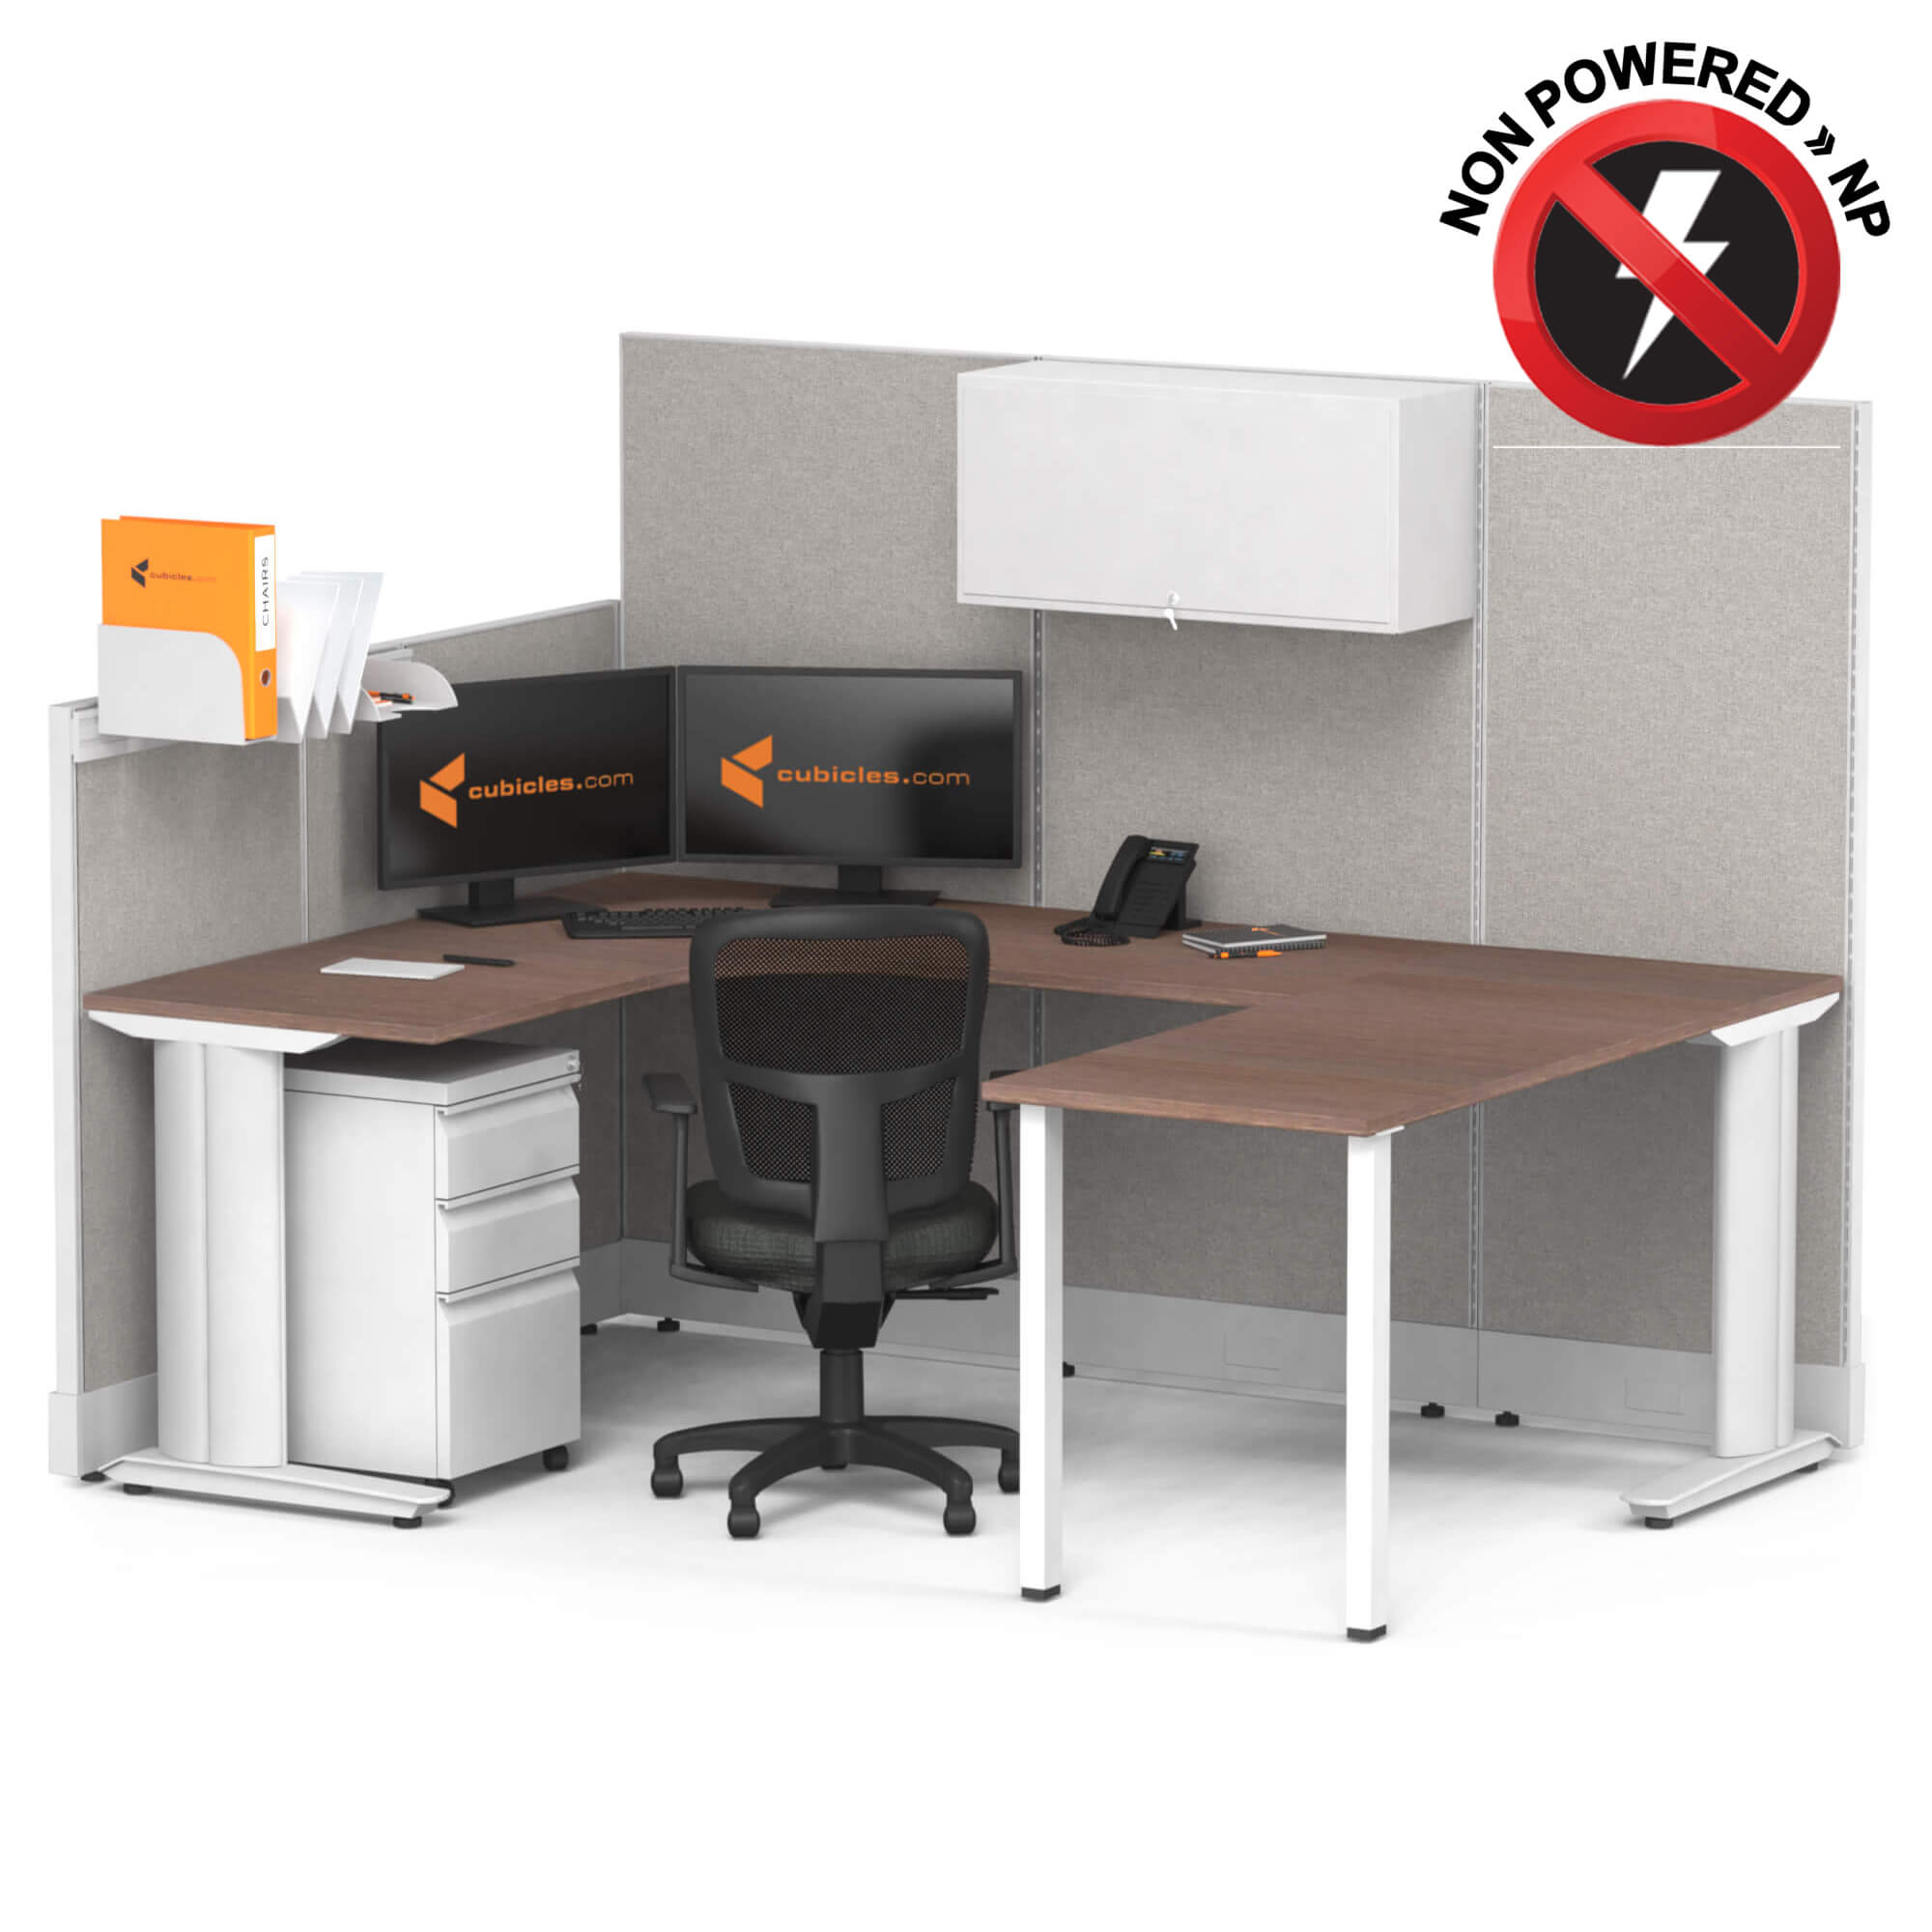 cubicle-desk-u-shaped-with-storage-1pack-non-powered-sign.jpg